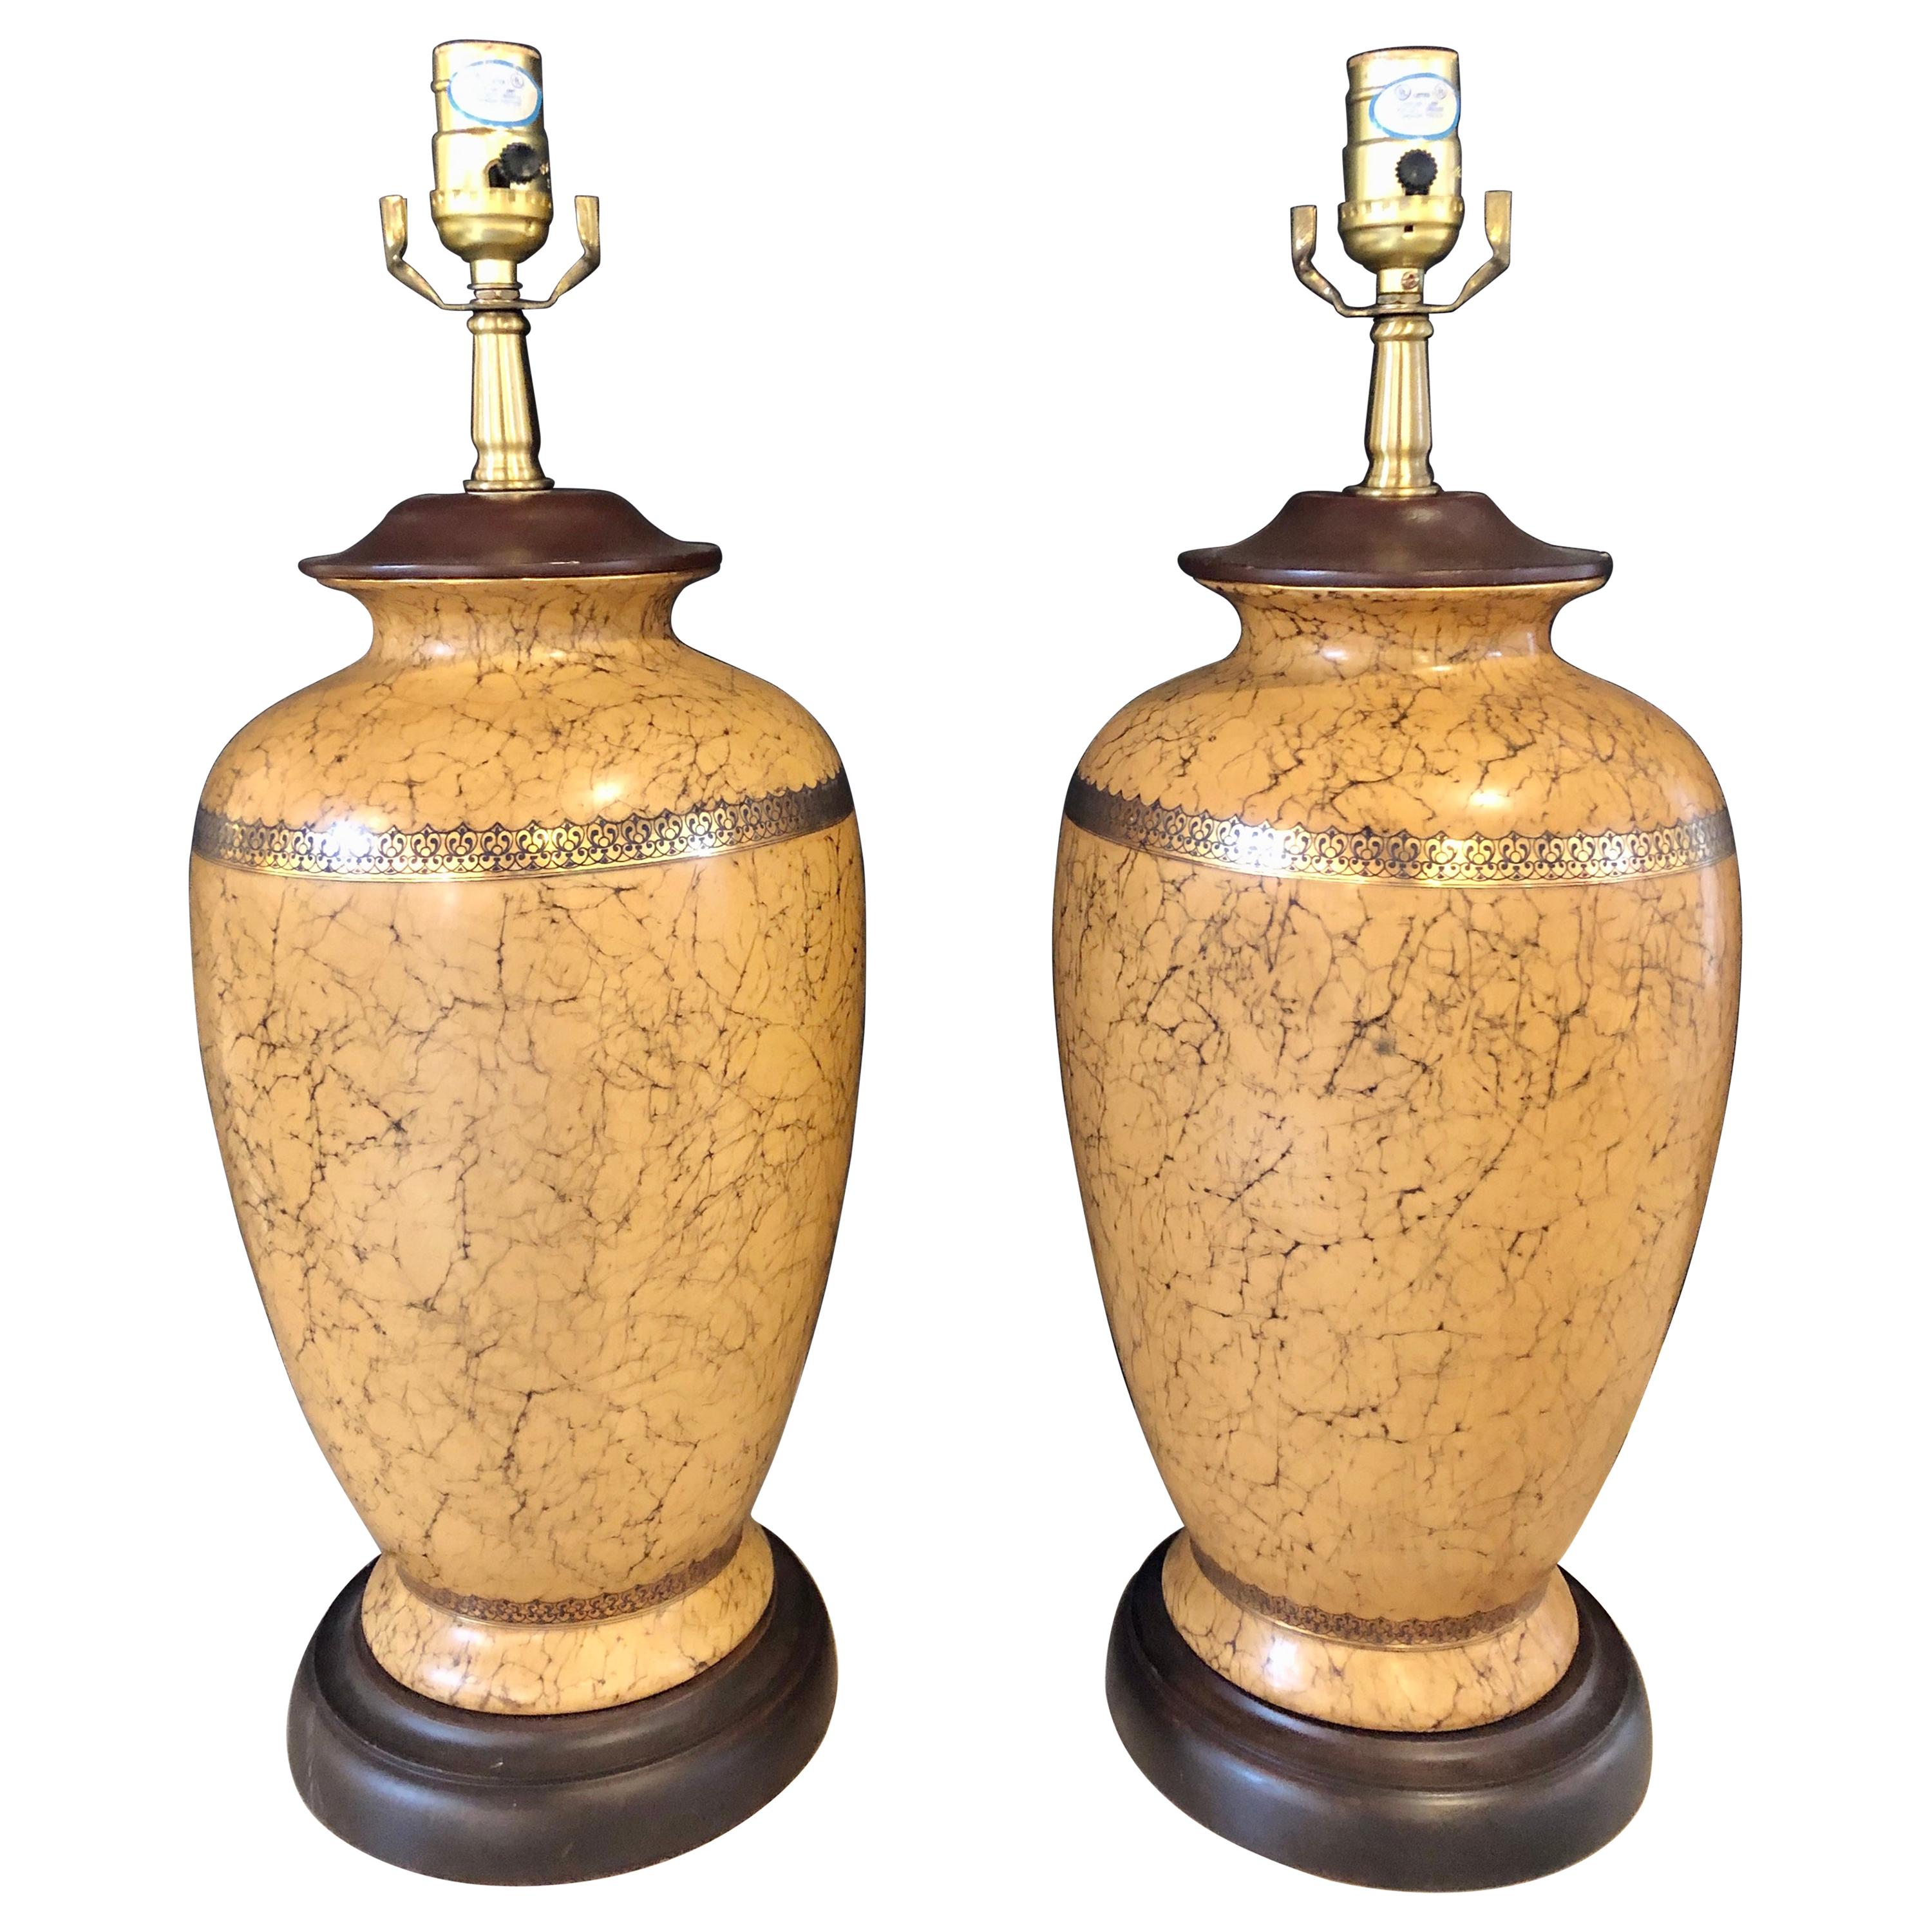 Pair of Ceramic Lamps with Gold Trim and Crackle Finish Wooden Base Bottom For Sale